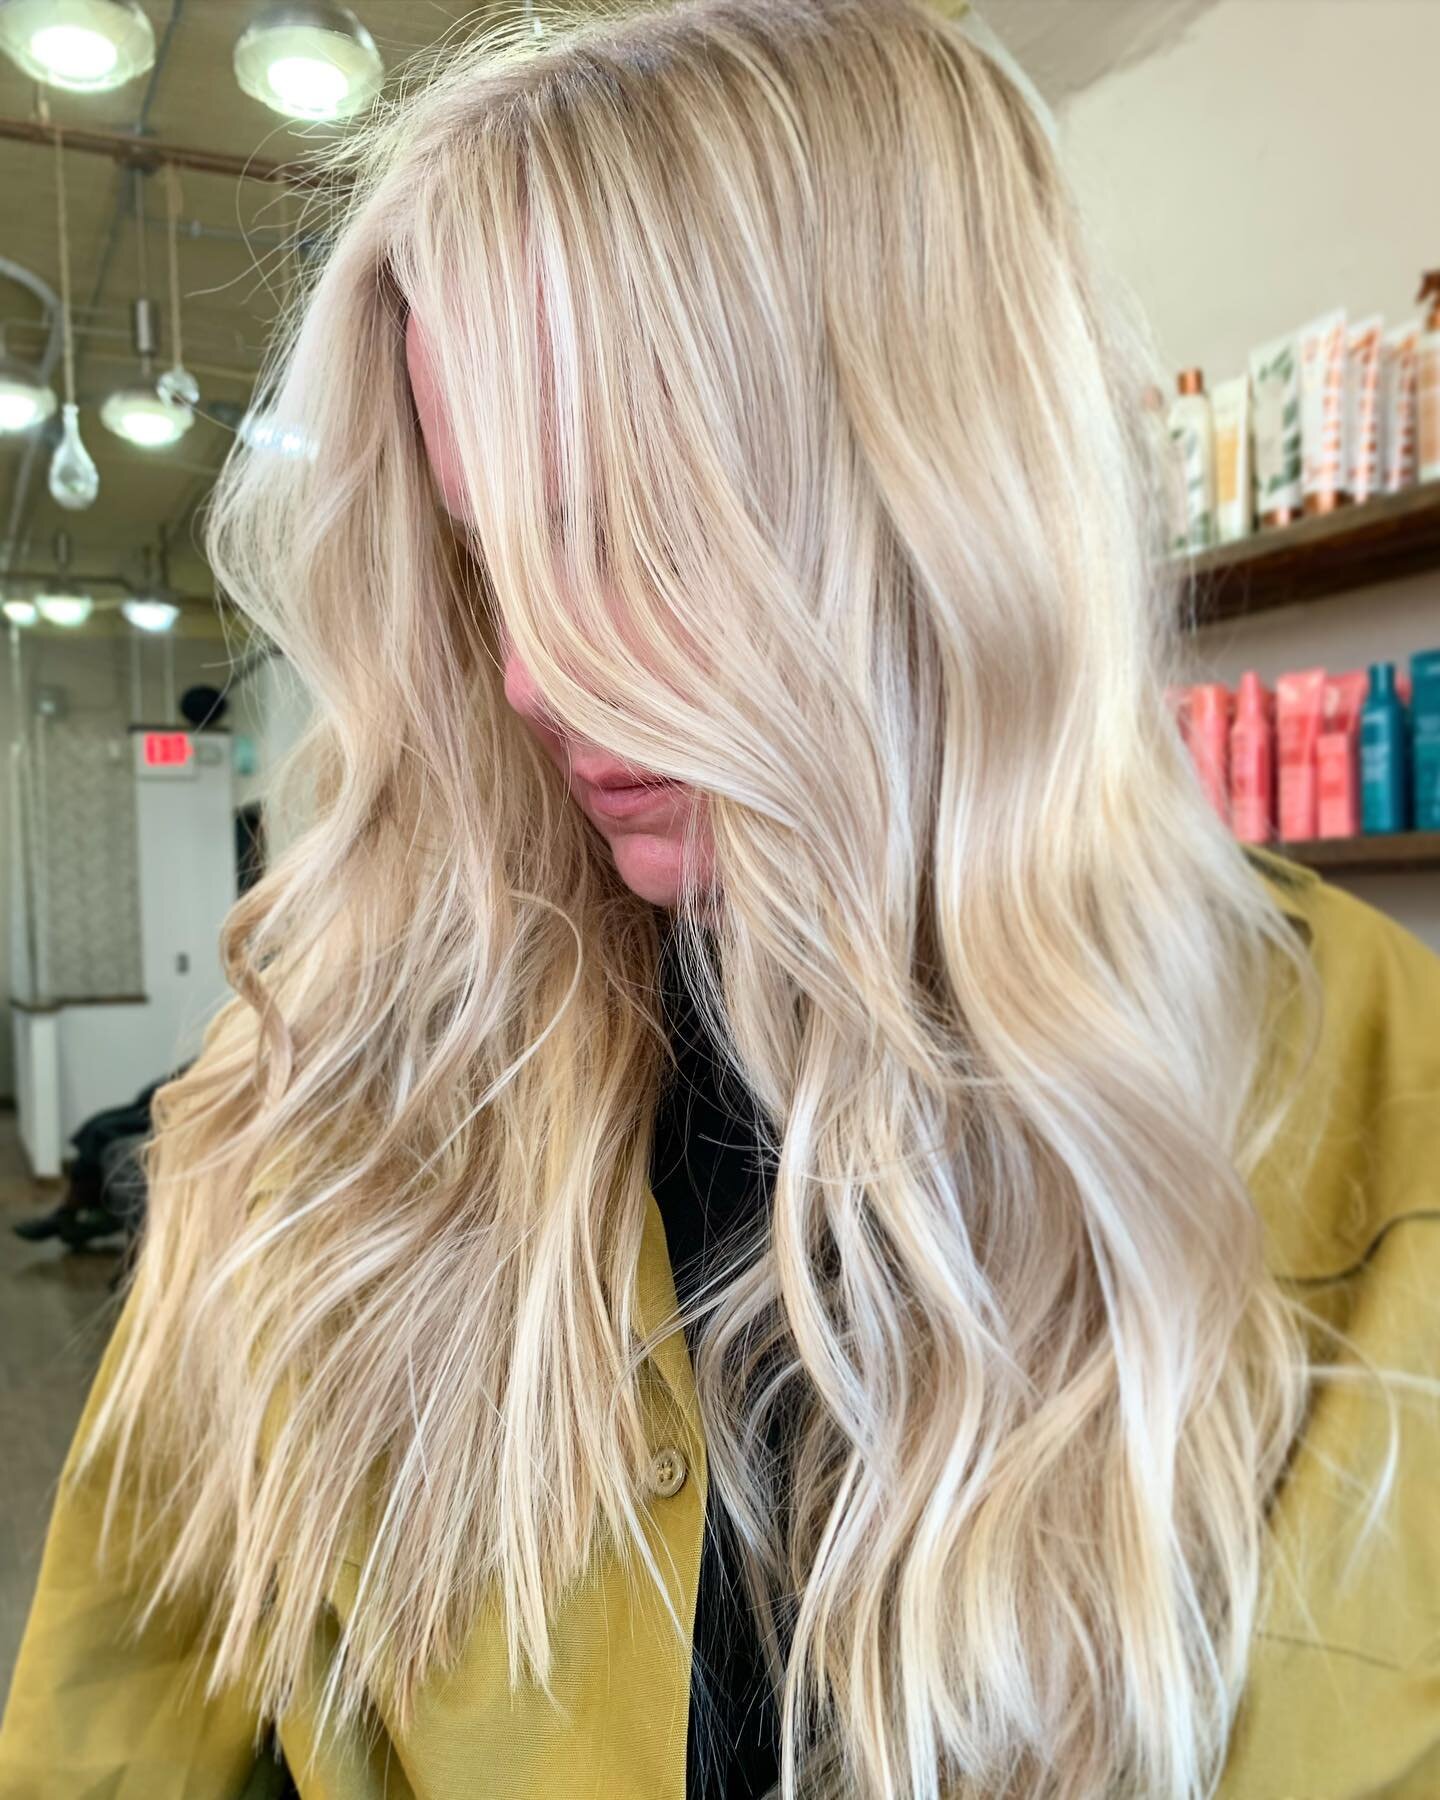 Let&rsquo;s pretend it&rsquo;s spring ☀️ it&rsquo;s never too soon to go blonde!